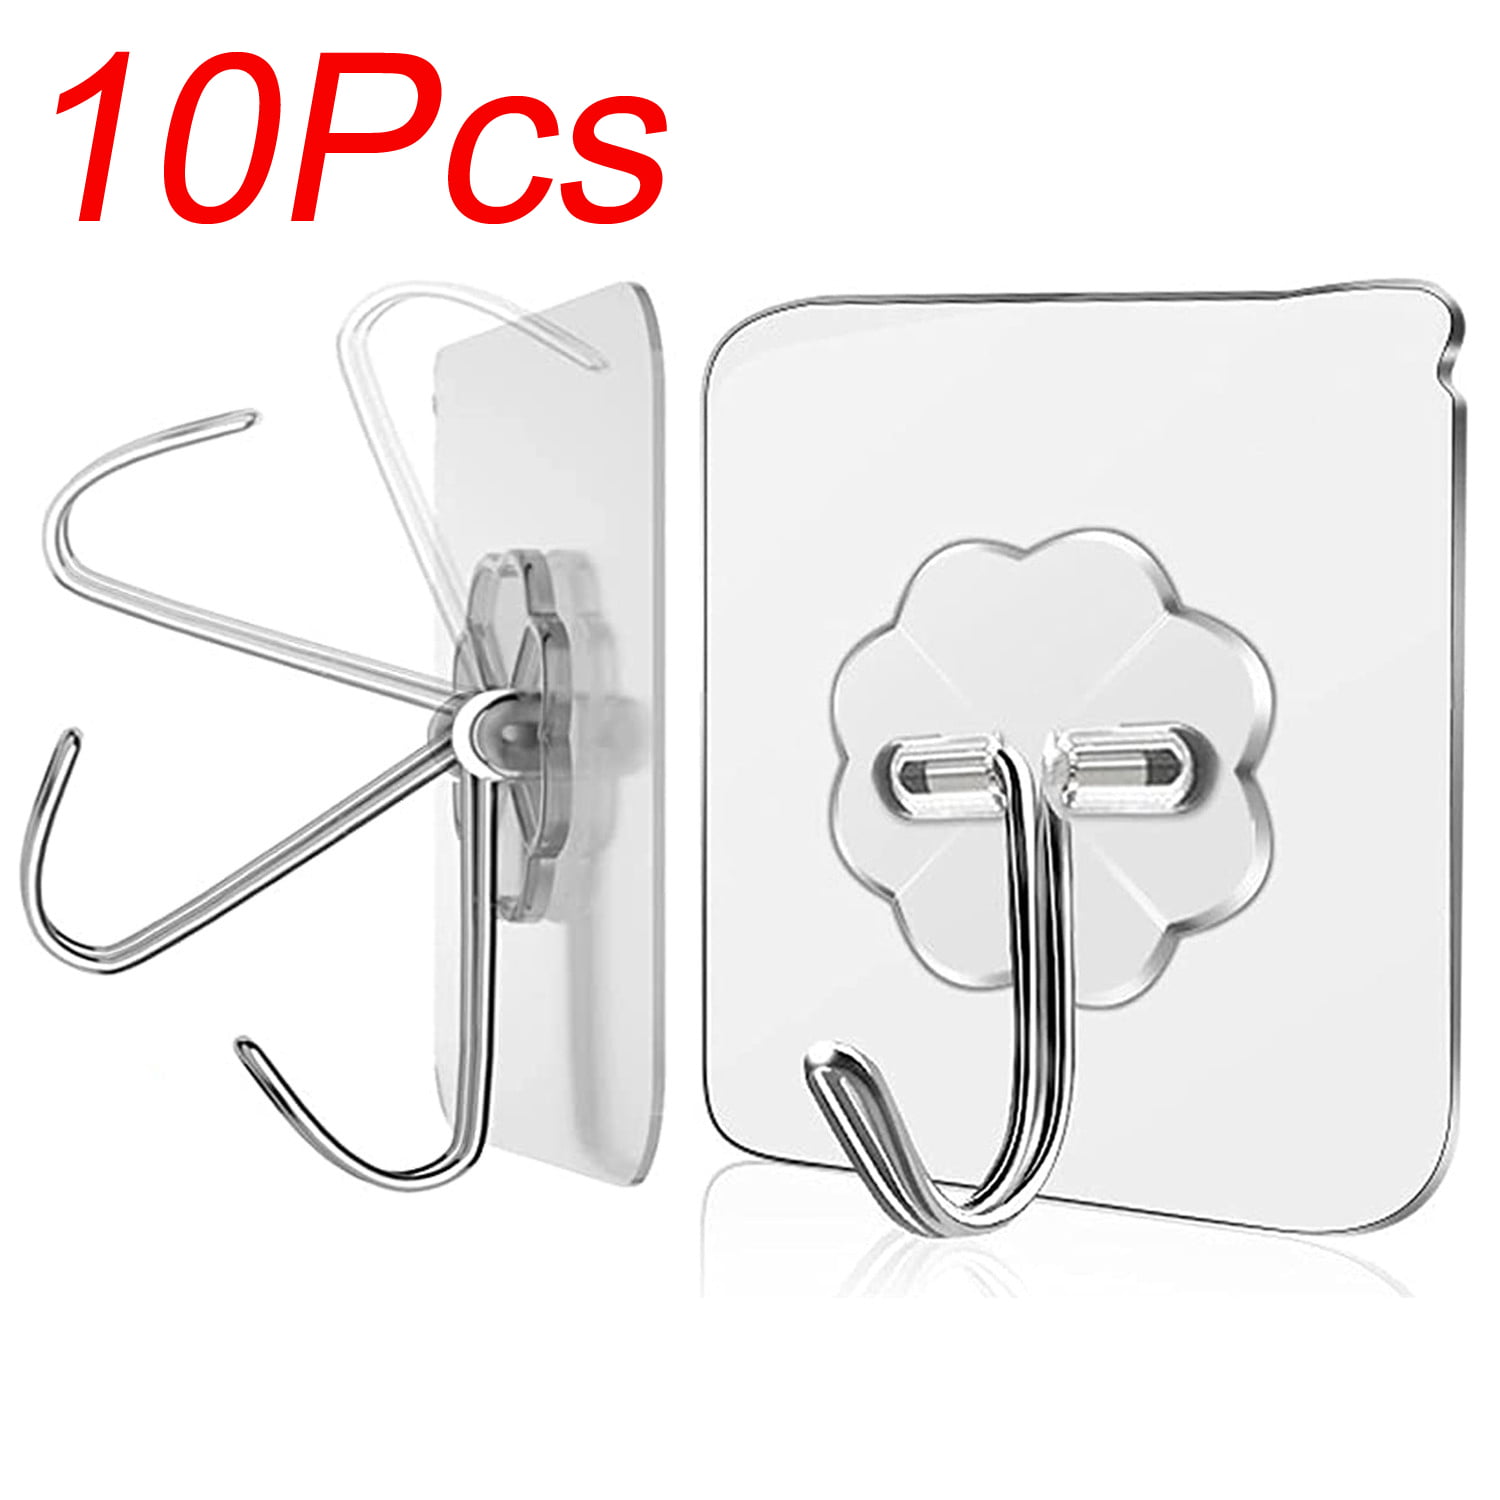 12 x  SELF ADHESIVE PLASTIC WALL & DOOR HOOKS Strong Sticky Stick On Peg Hanger 